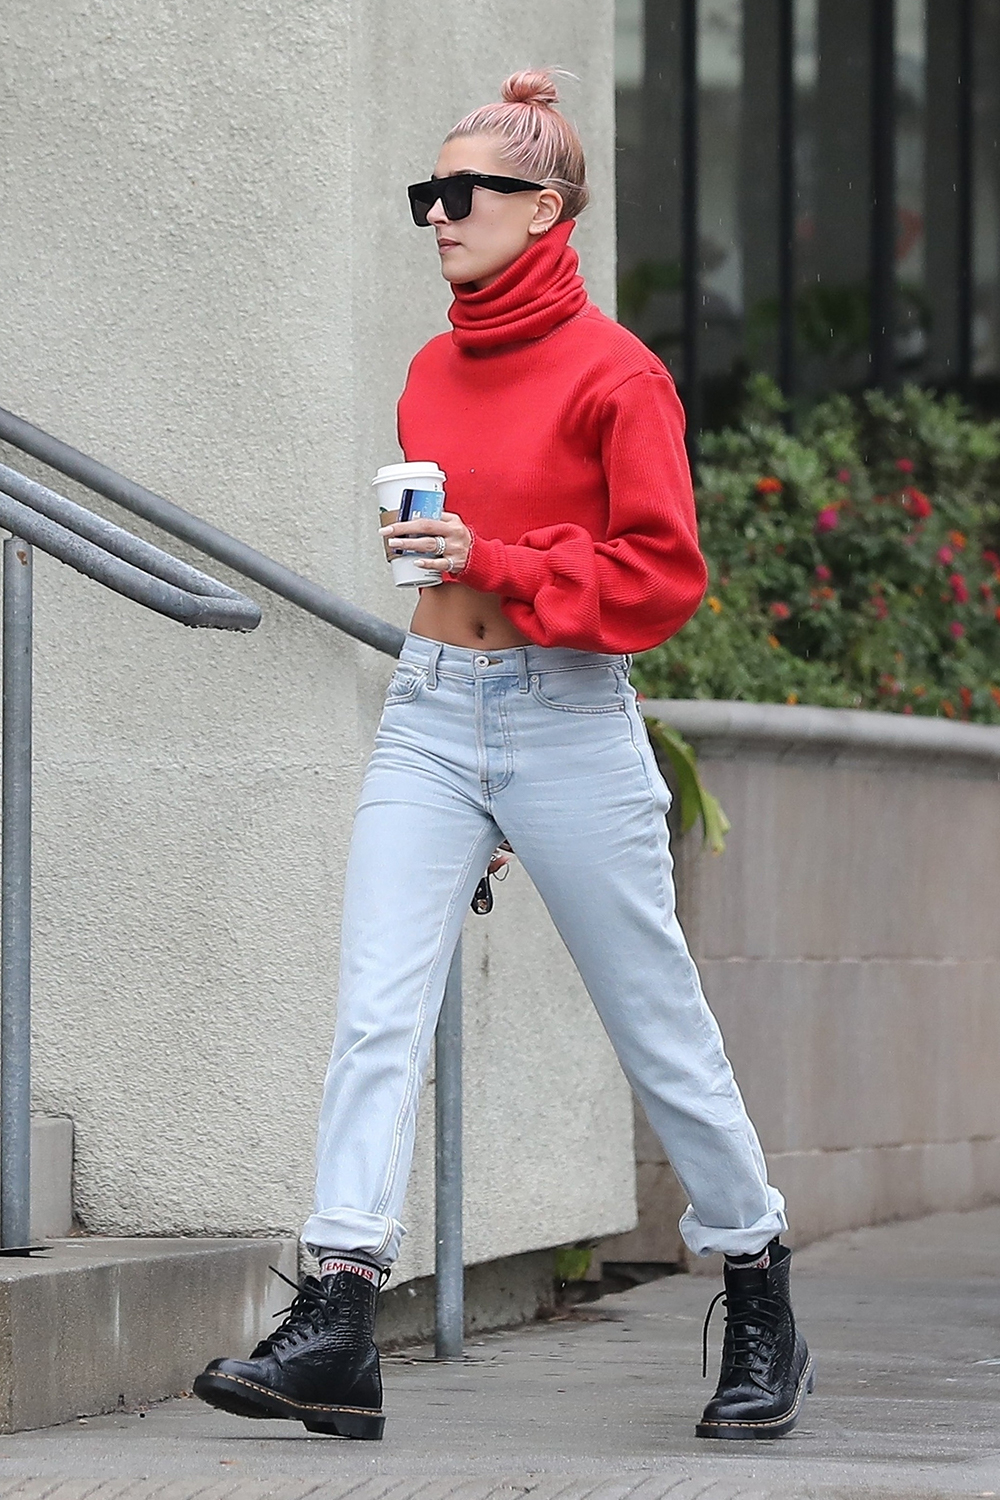 8 Cropped Sweater Outfits to Wear This 